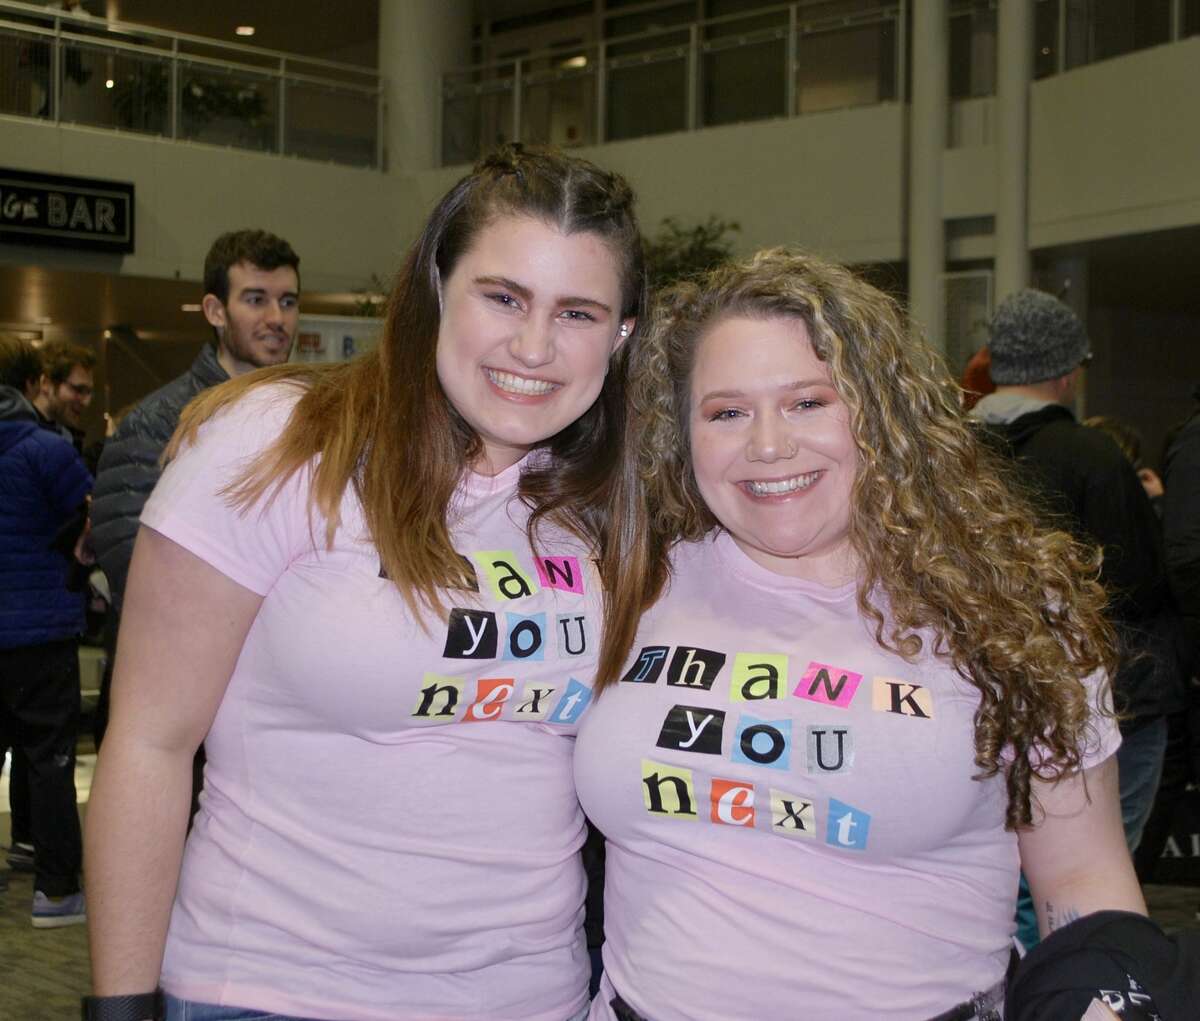 Were you Seen at the Ariana Grande concert at Times Union Center in Albany on March 18, 2019?